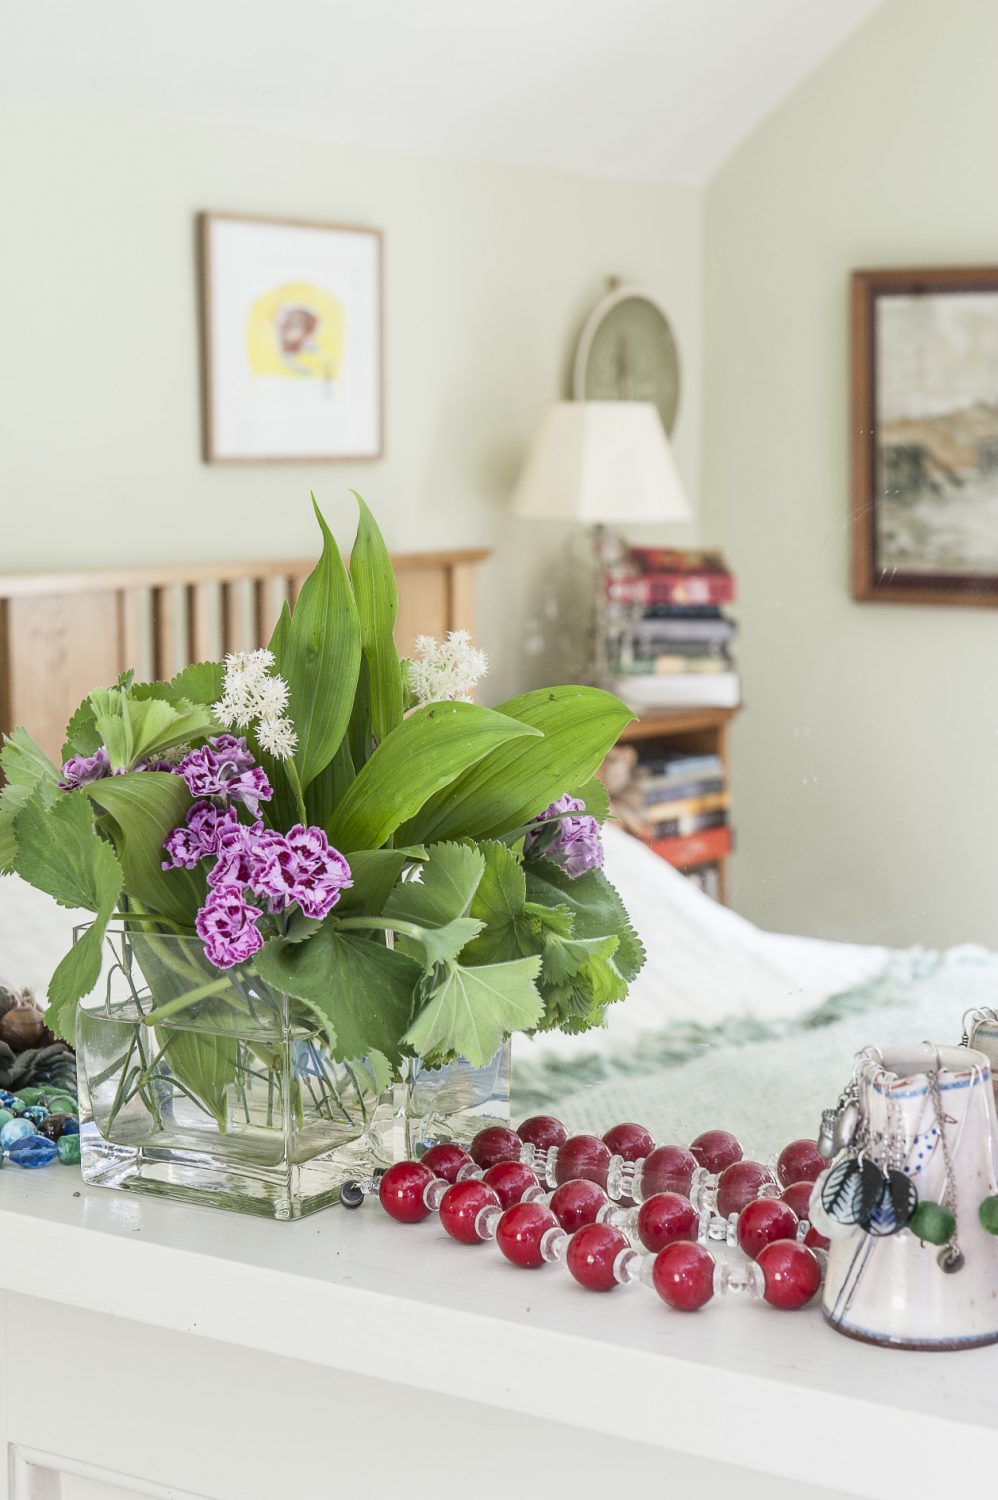 The master bedroom is painted a calming hue of very pale green. As in most rooms of the house, Wendy has gathered flowers and foliage from the garden which are positioned on the mantelpiece alongside her jewellery